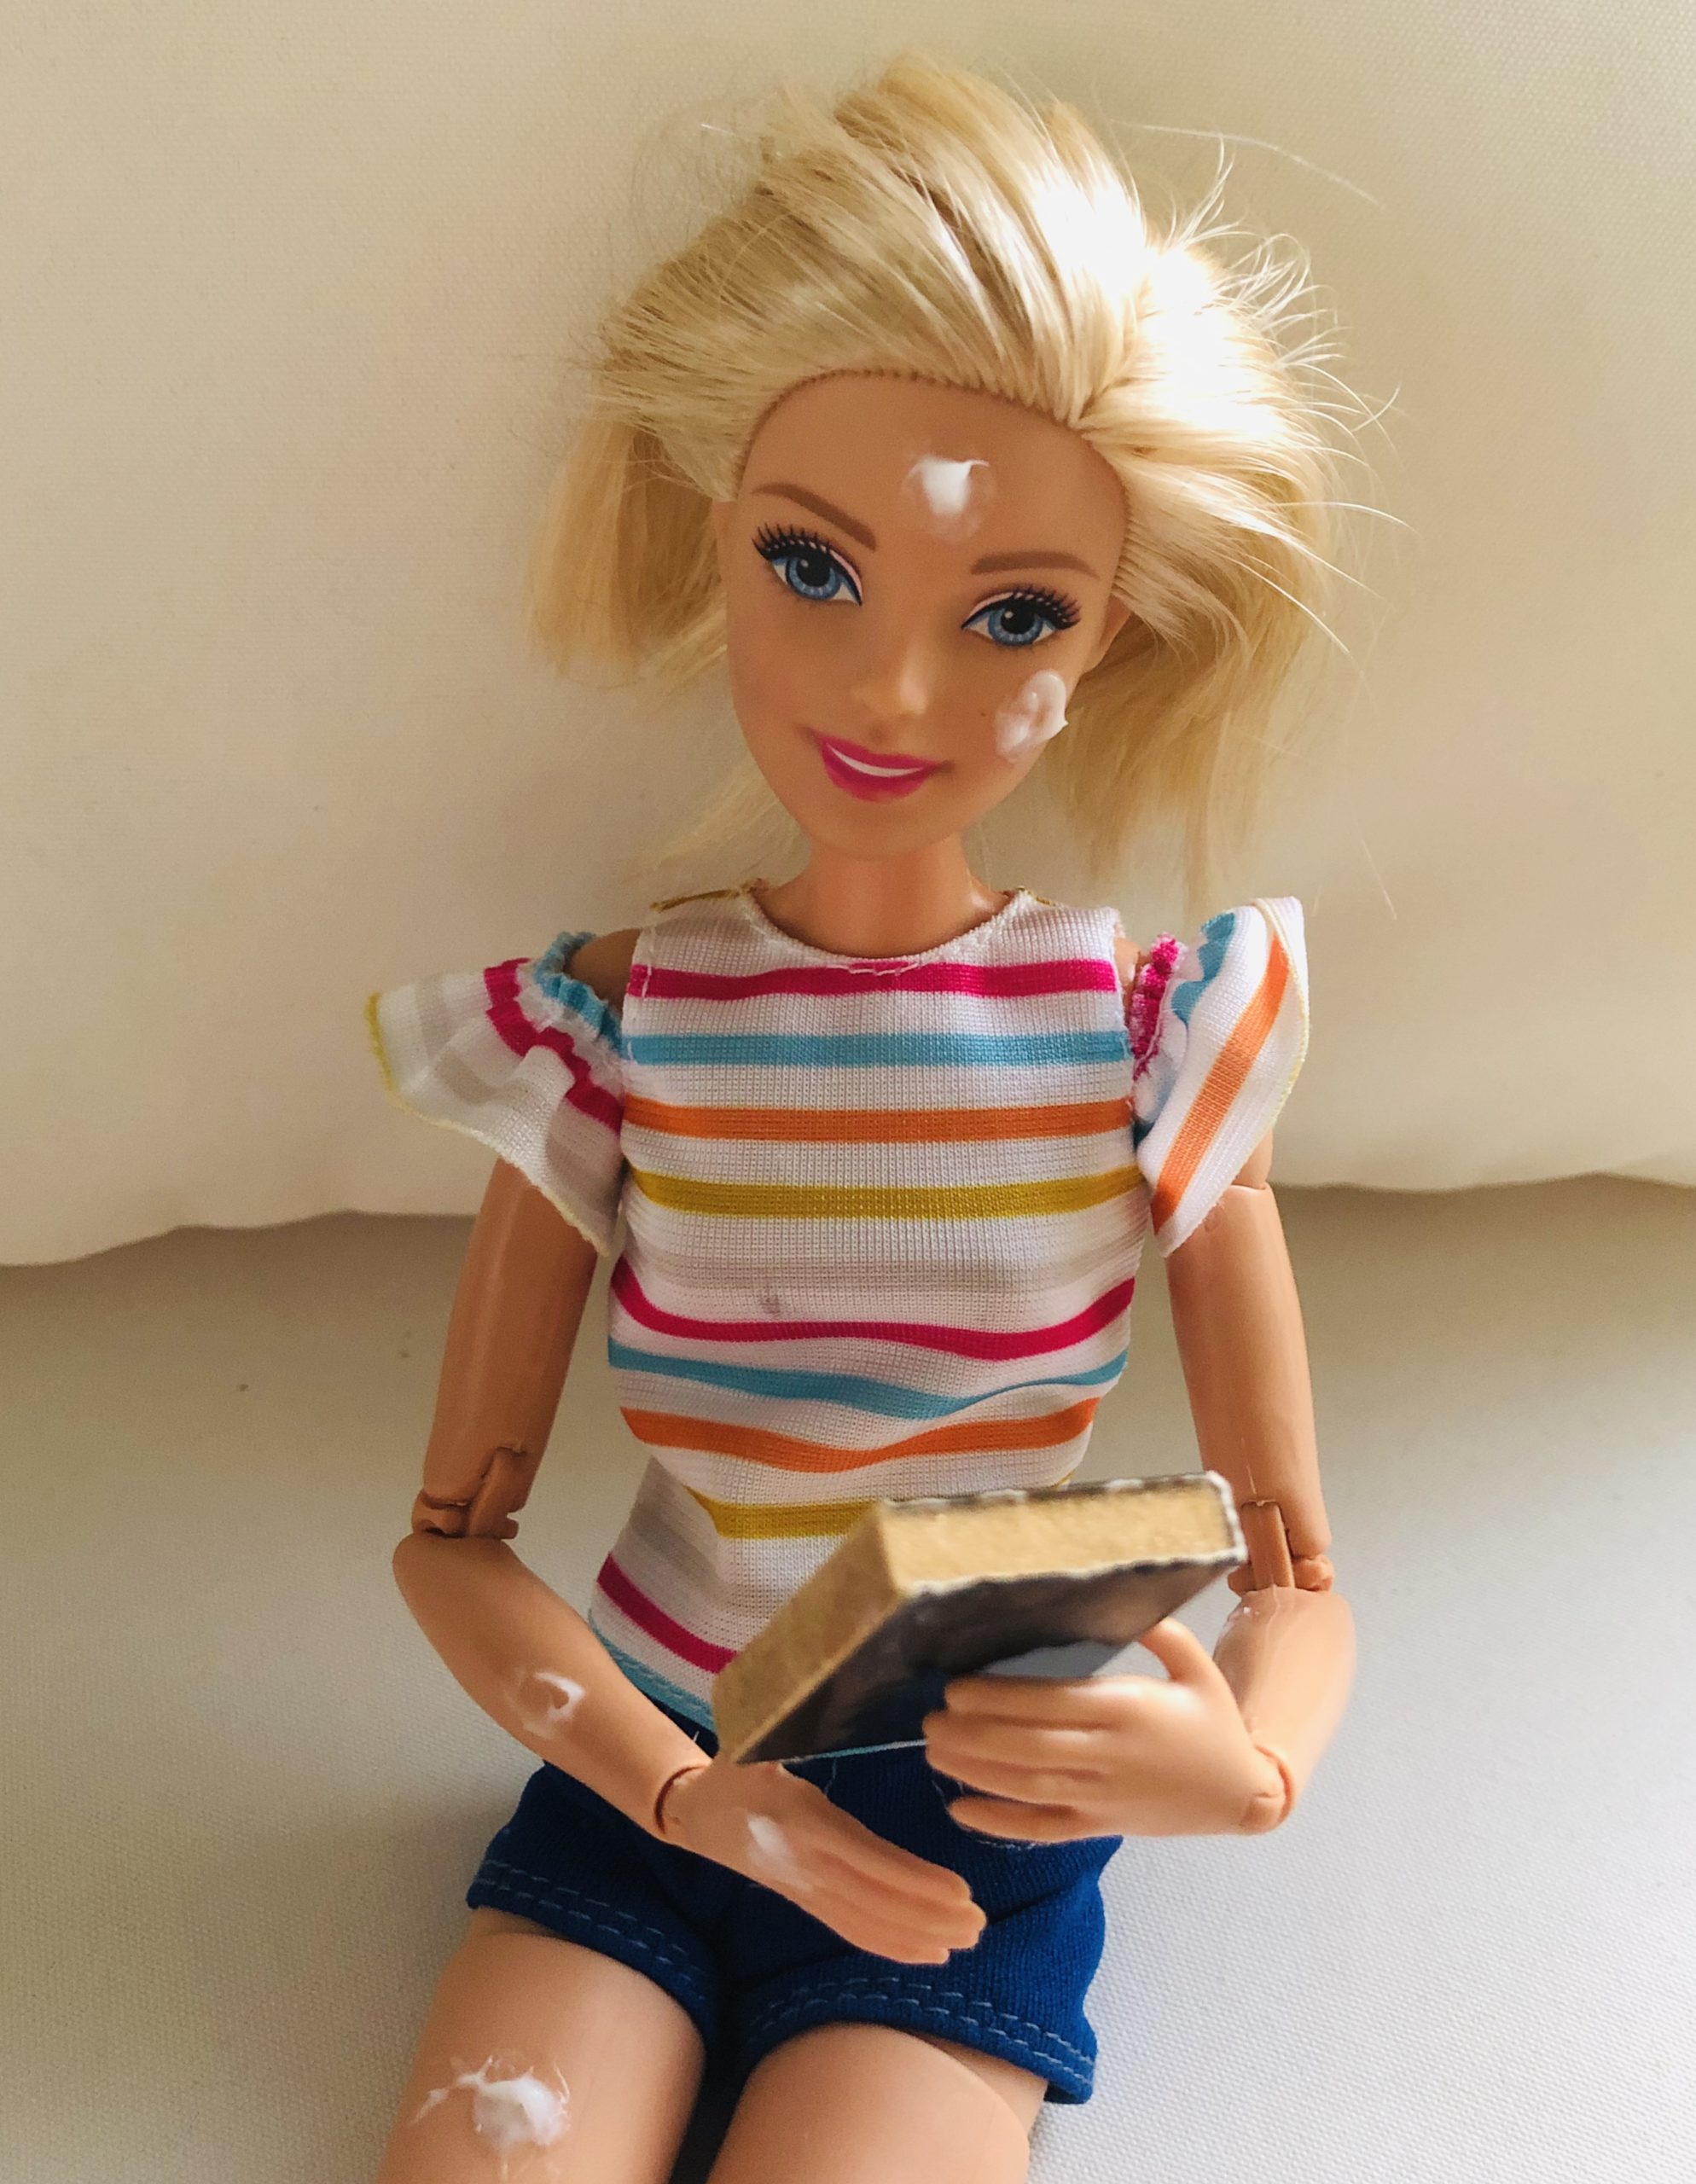 Barbie doll reading a book, wearing a rainbow colored striped shirt.